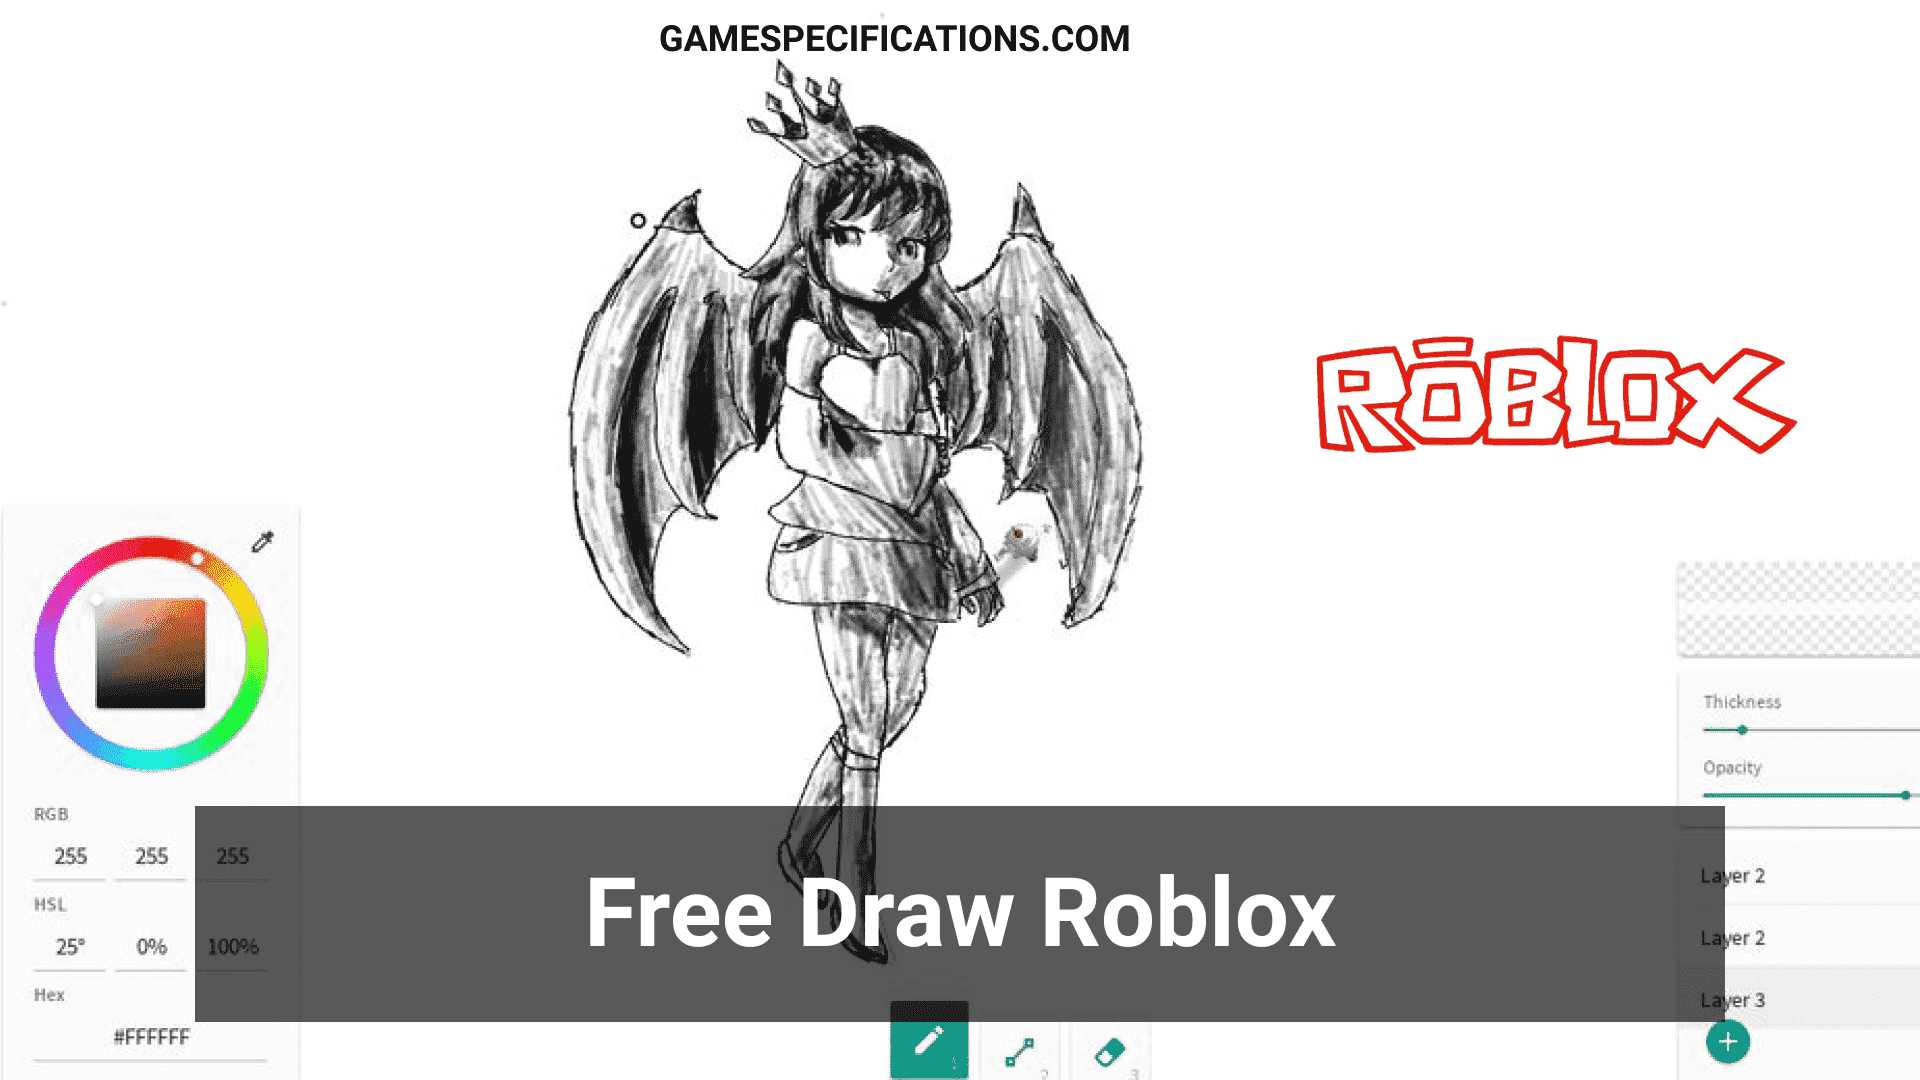 Free Draw Roblox Is A Creative Game To Express Your Skills Game Specifications - roblox free draw game